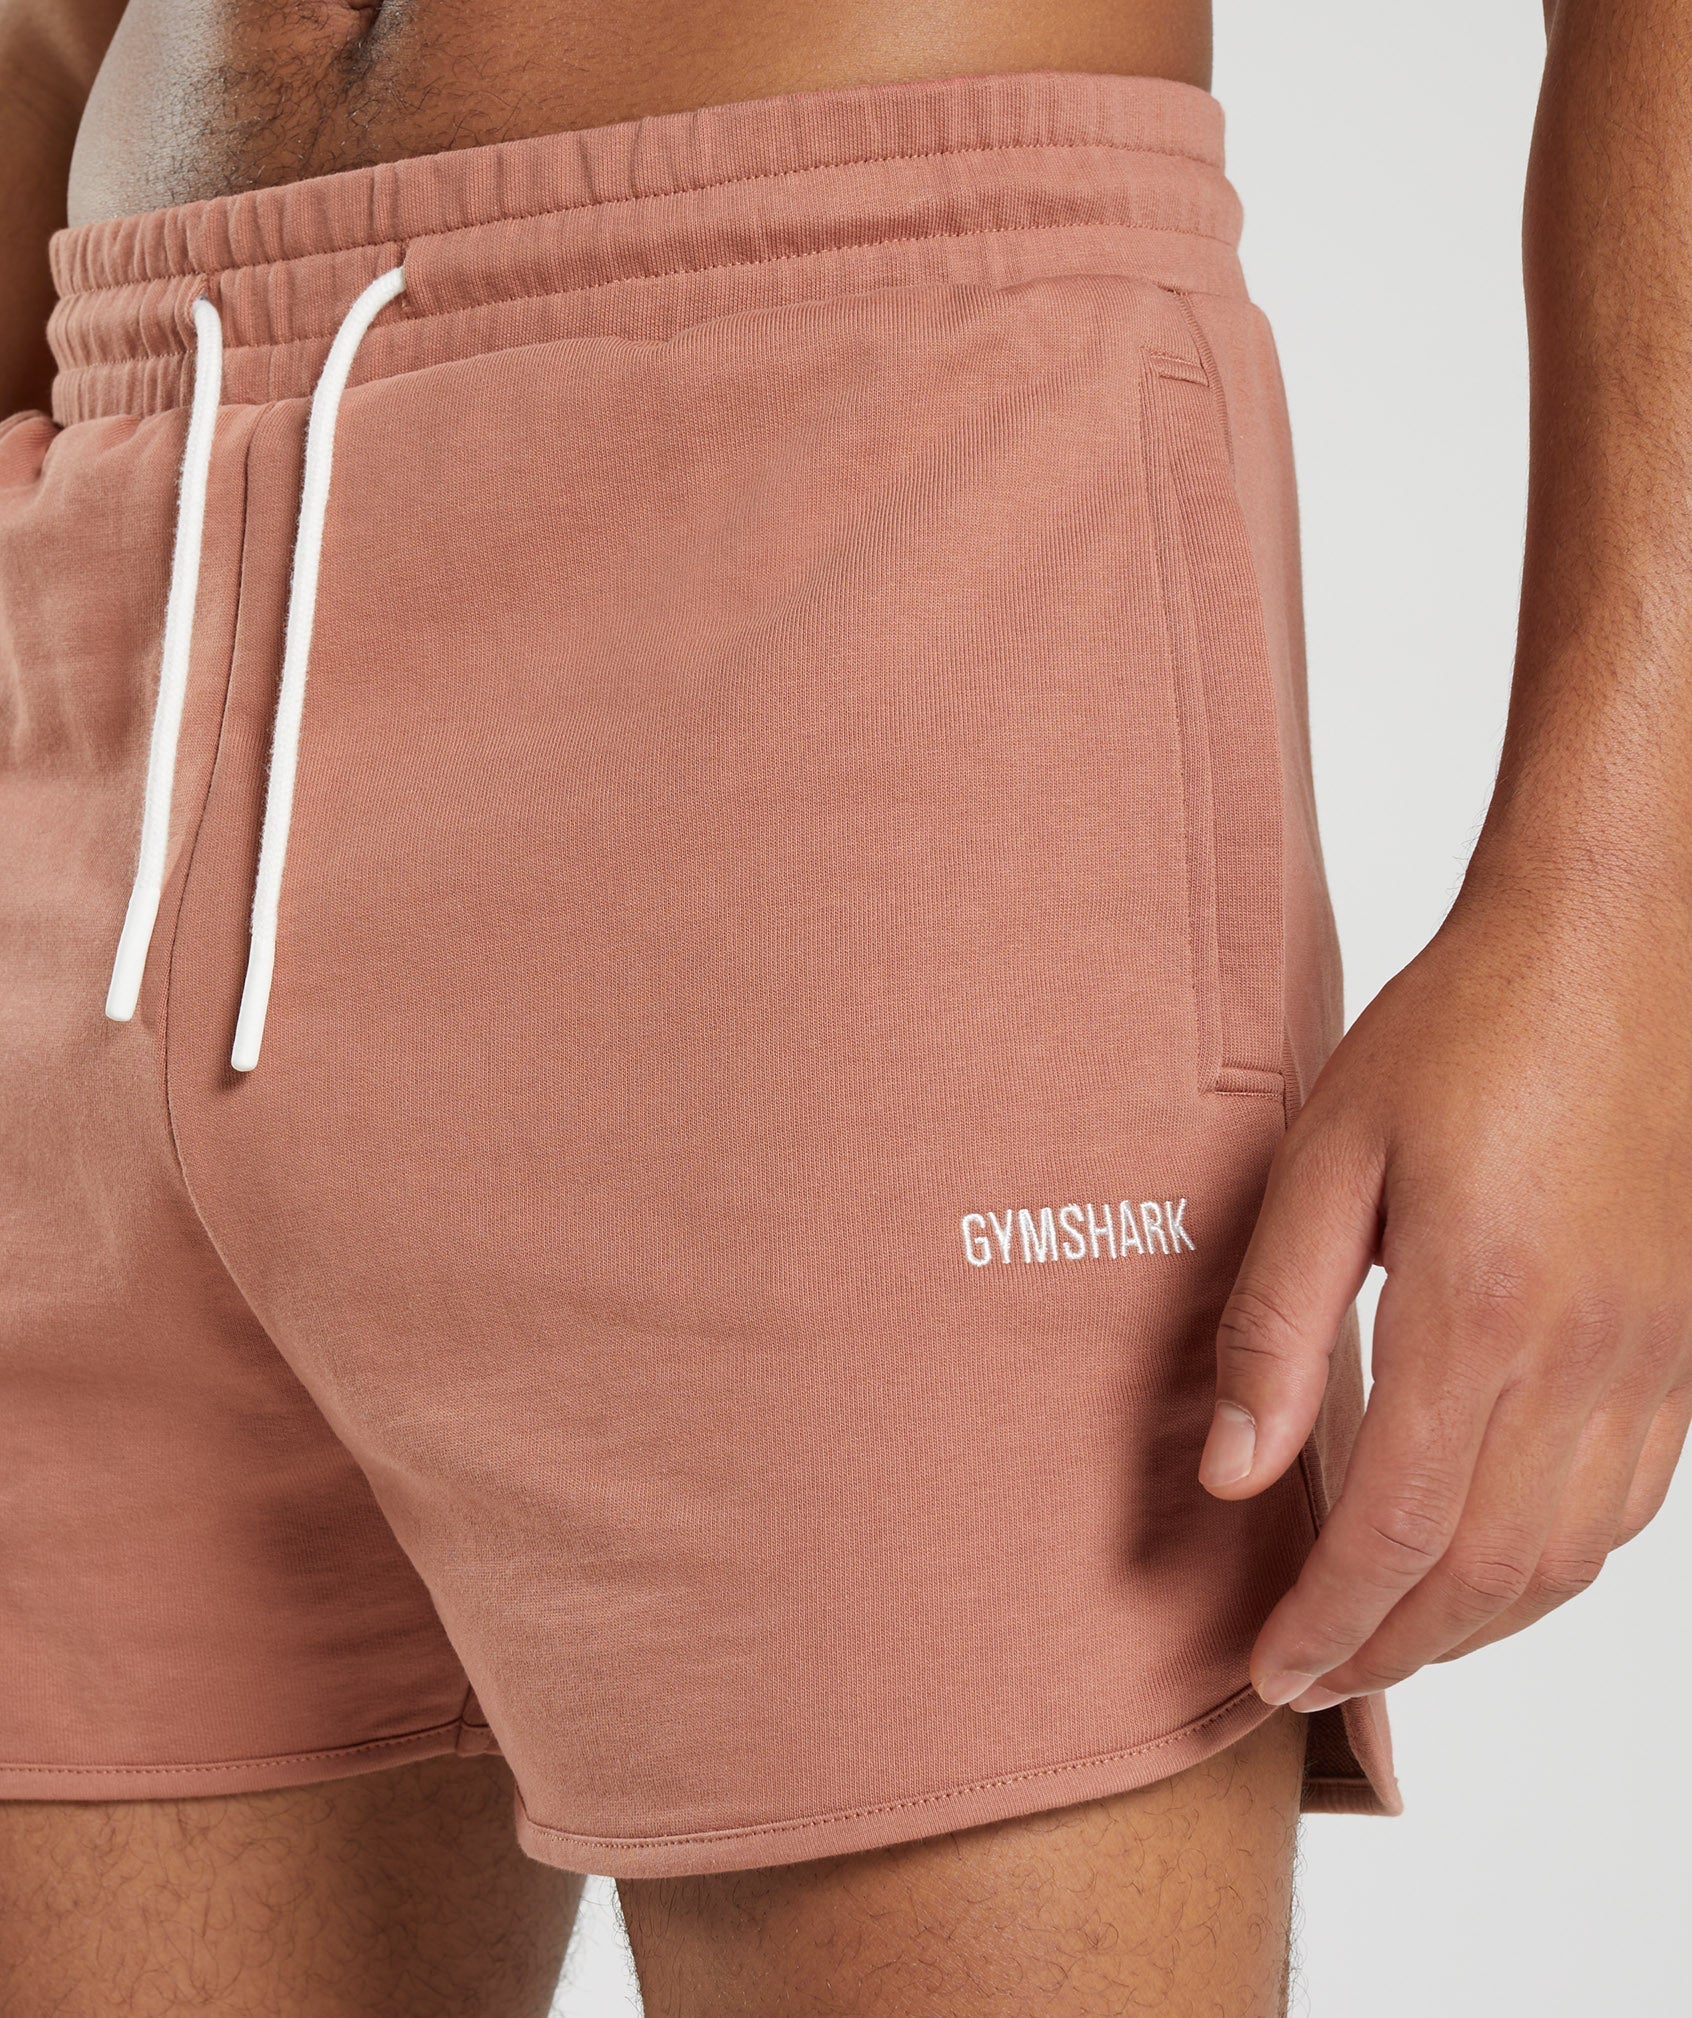 Rest Day Sweats 4'' Lounge Shorts in Toffee Brown